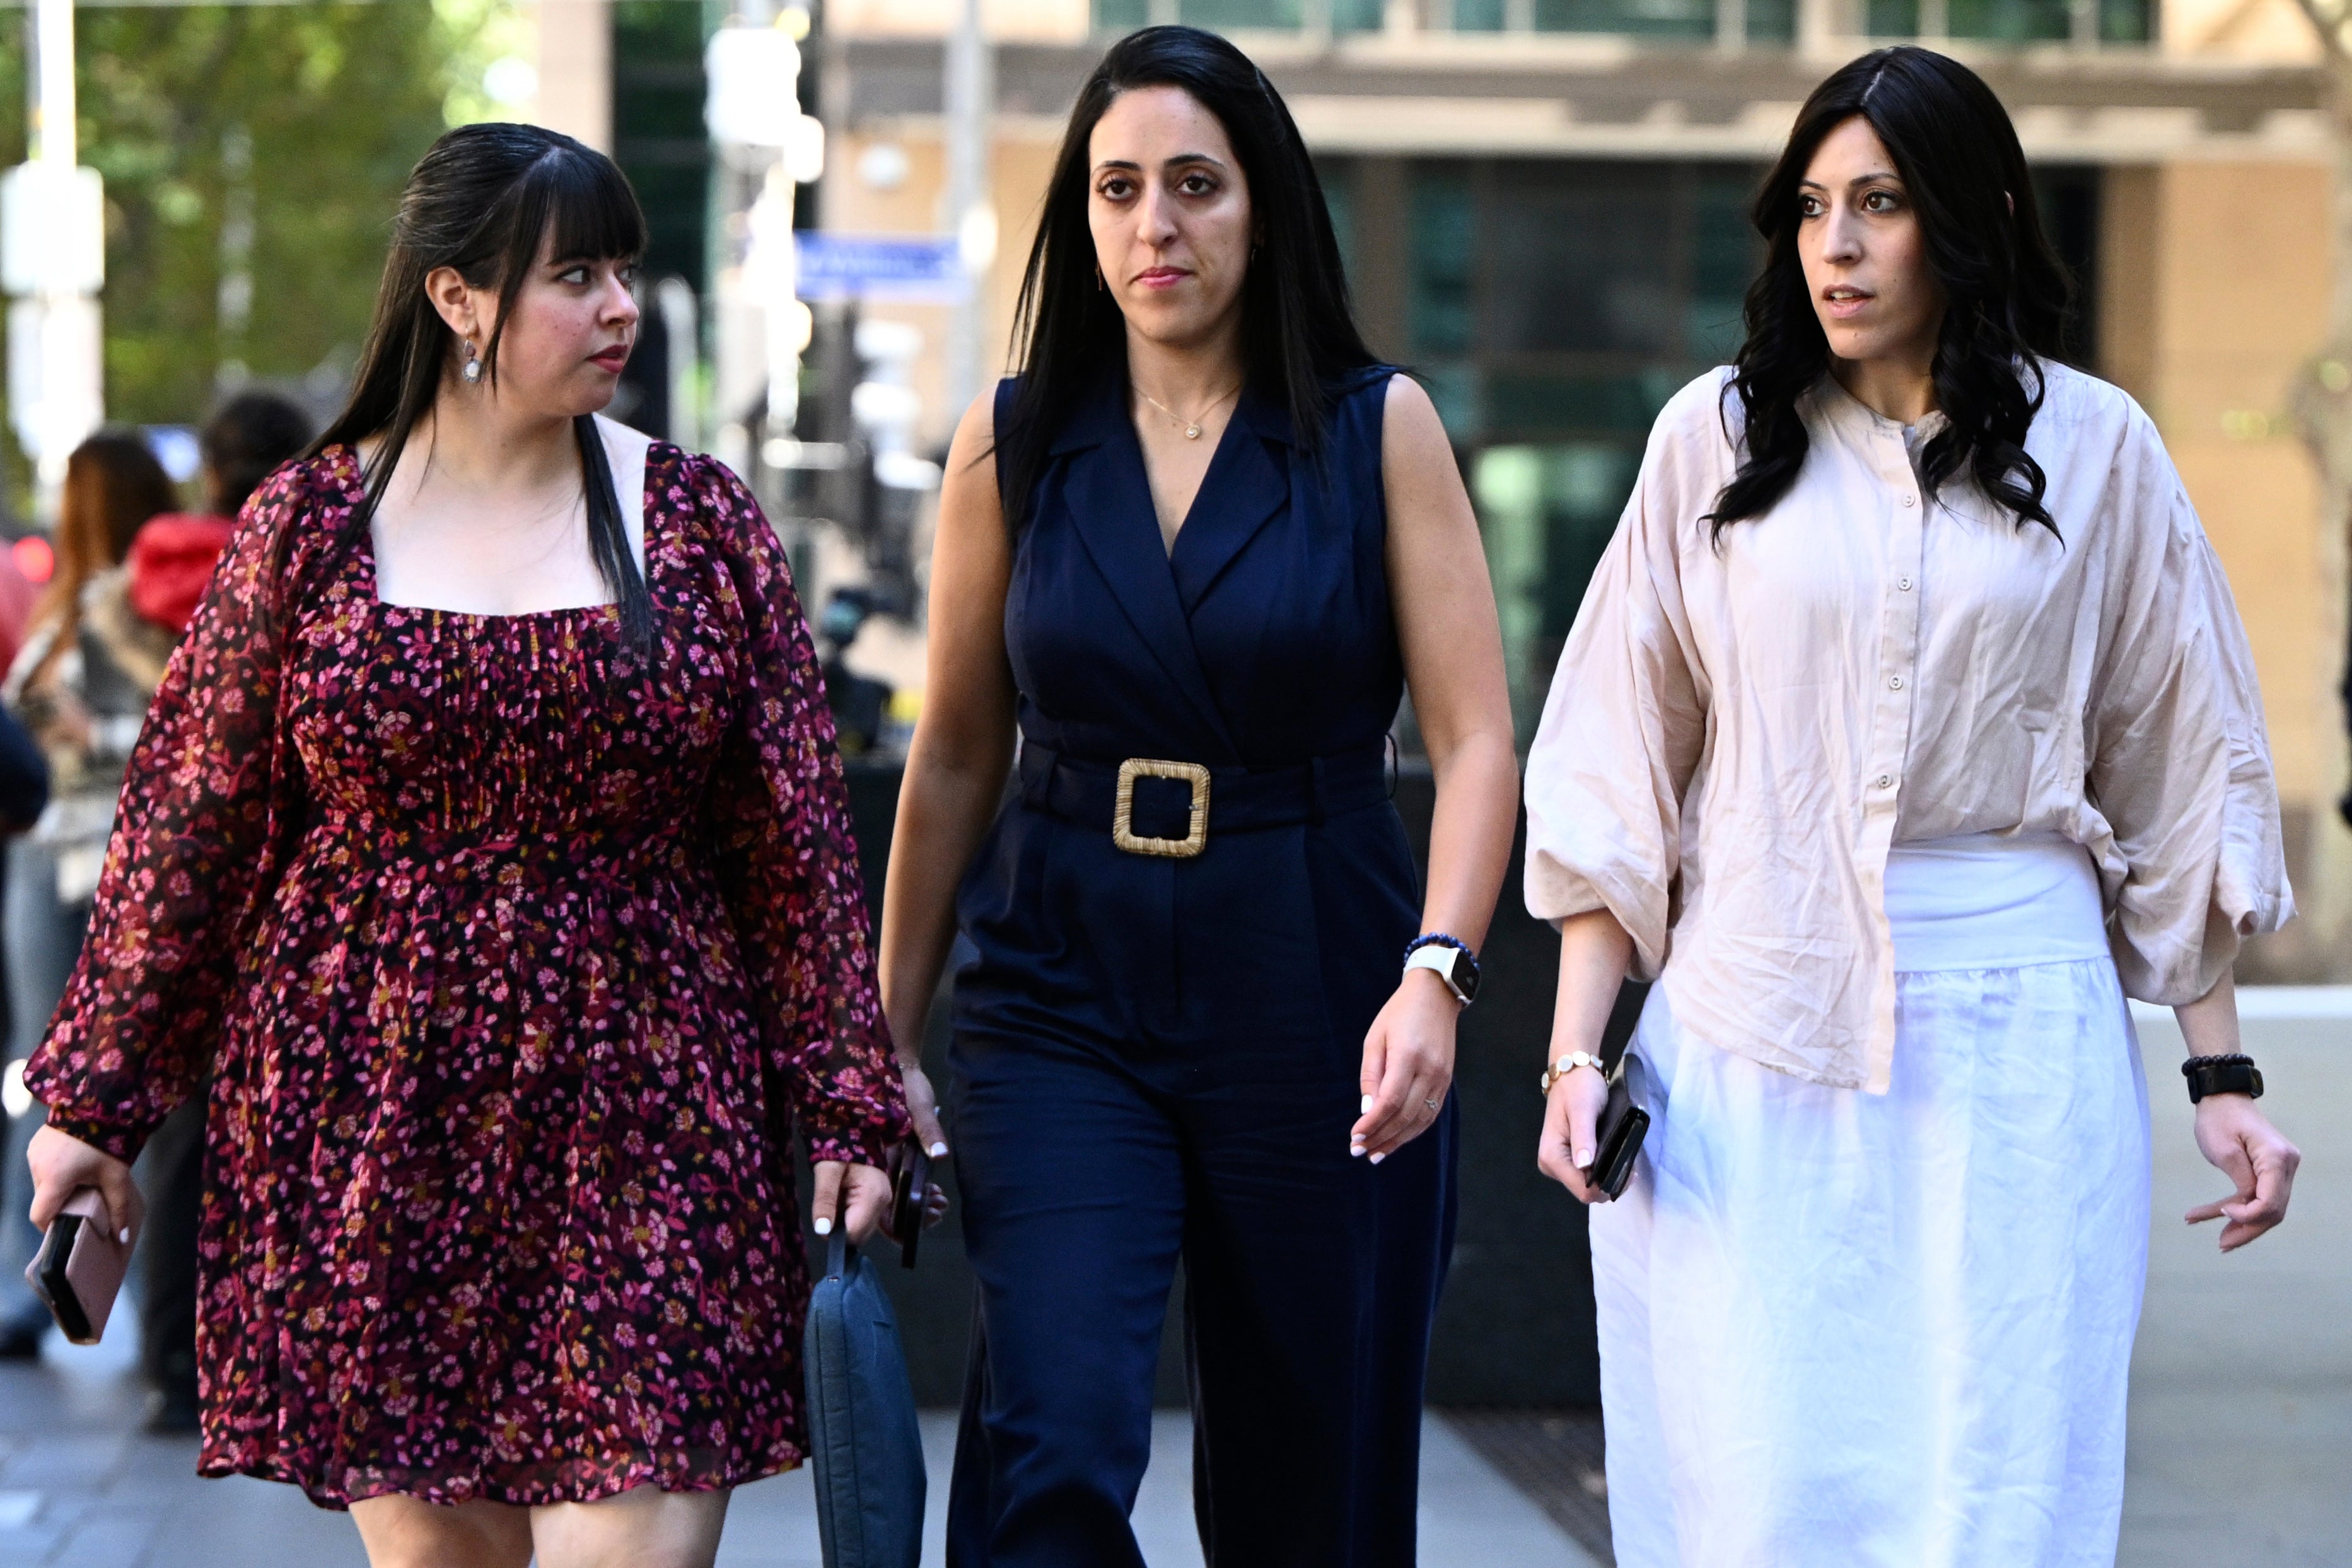 Malka Leifer Israeli ex-principal found guilty of sexually assaulting students at Jewish girls school in Australia The Independent